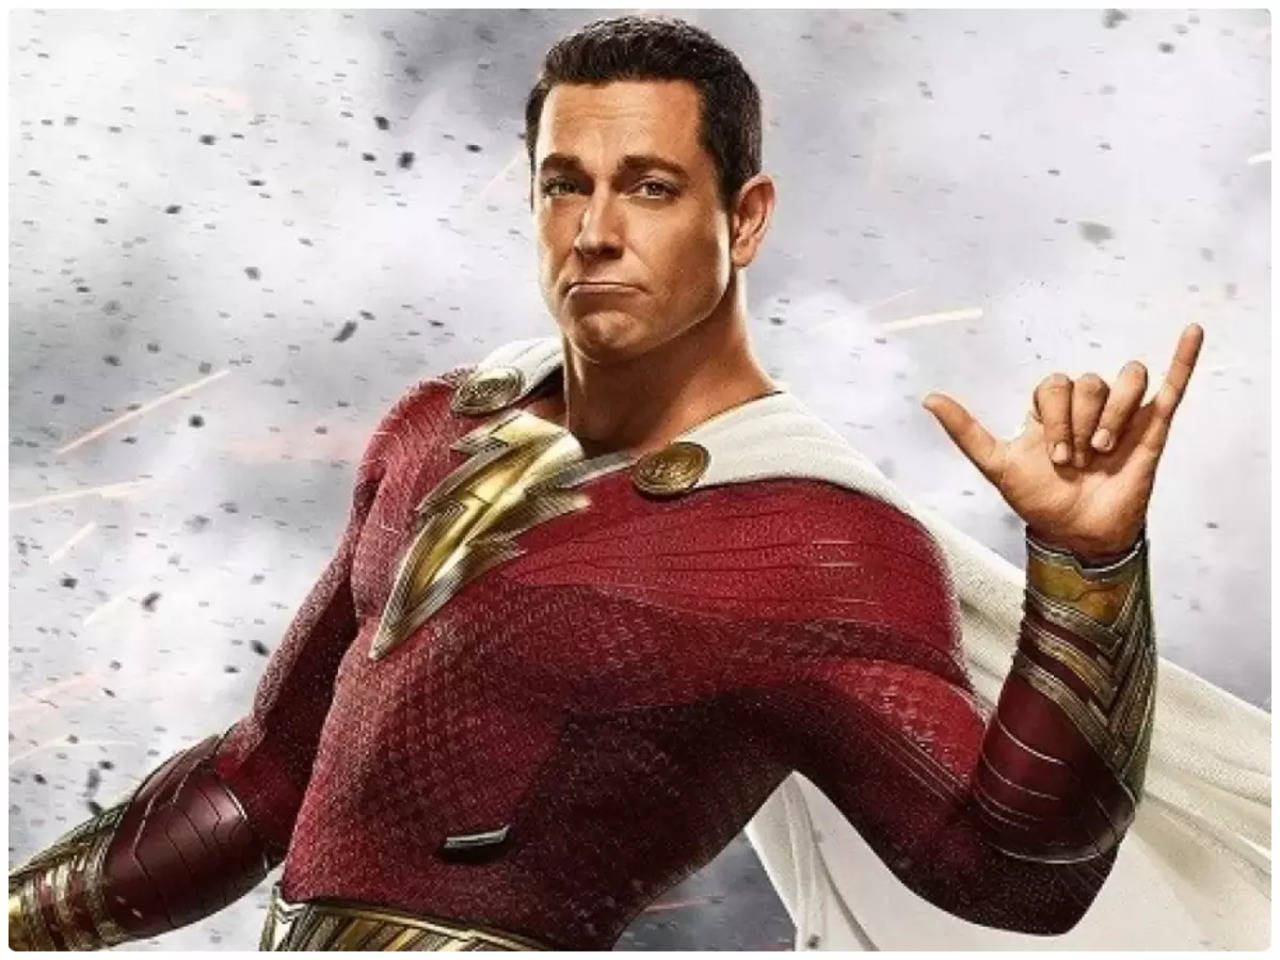 Shazam! Fury of the Gods' has disappointing $30.5 million debut at